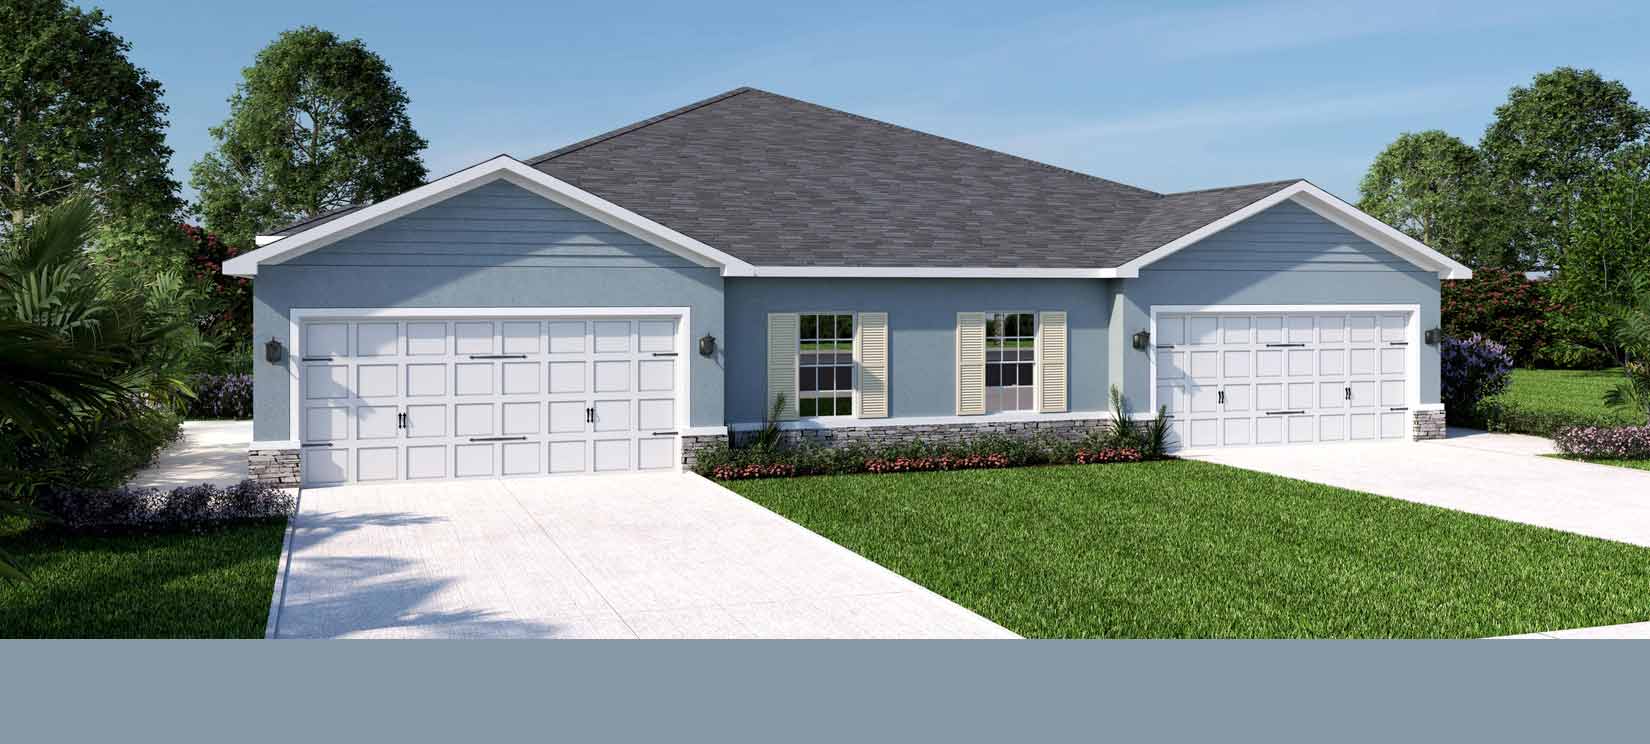 Ryan Homes Winterhaven Paired Villas Coming Soon to West Port in Port Charlotte